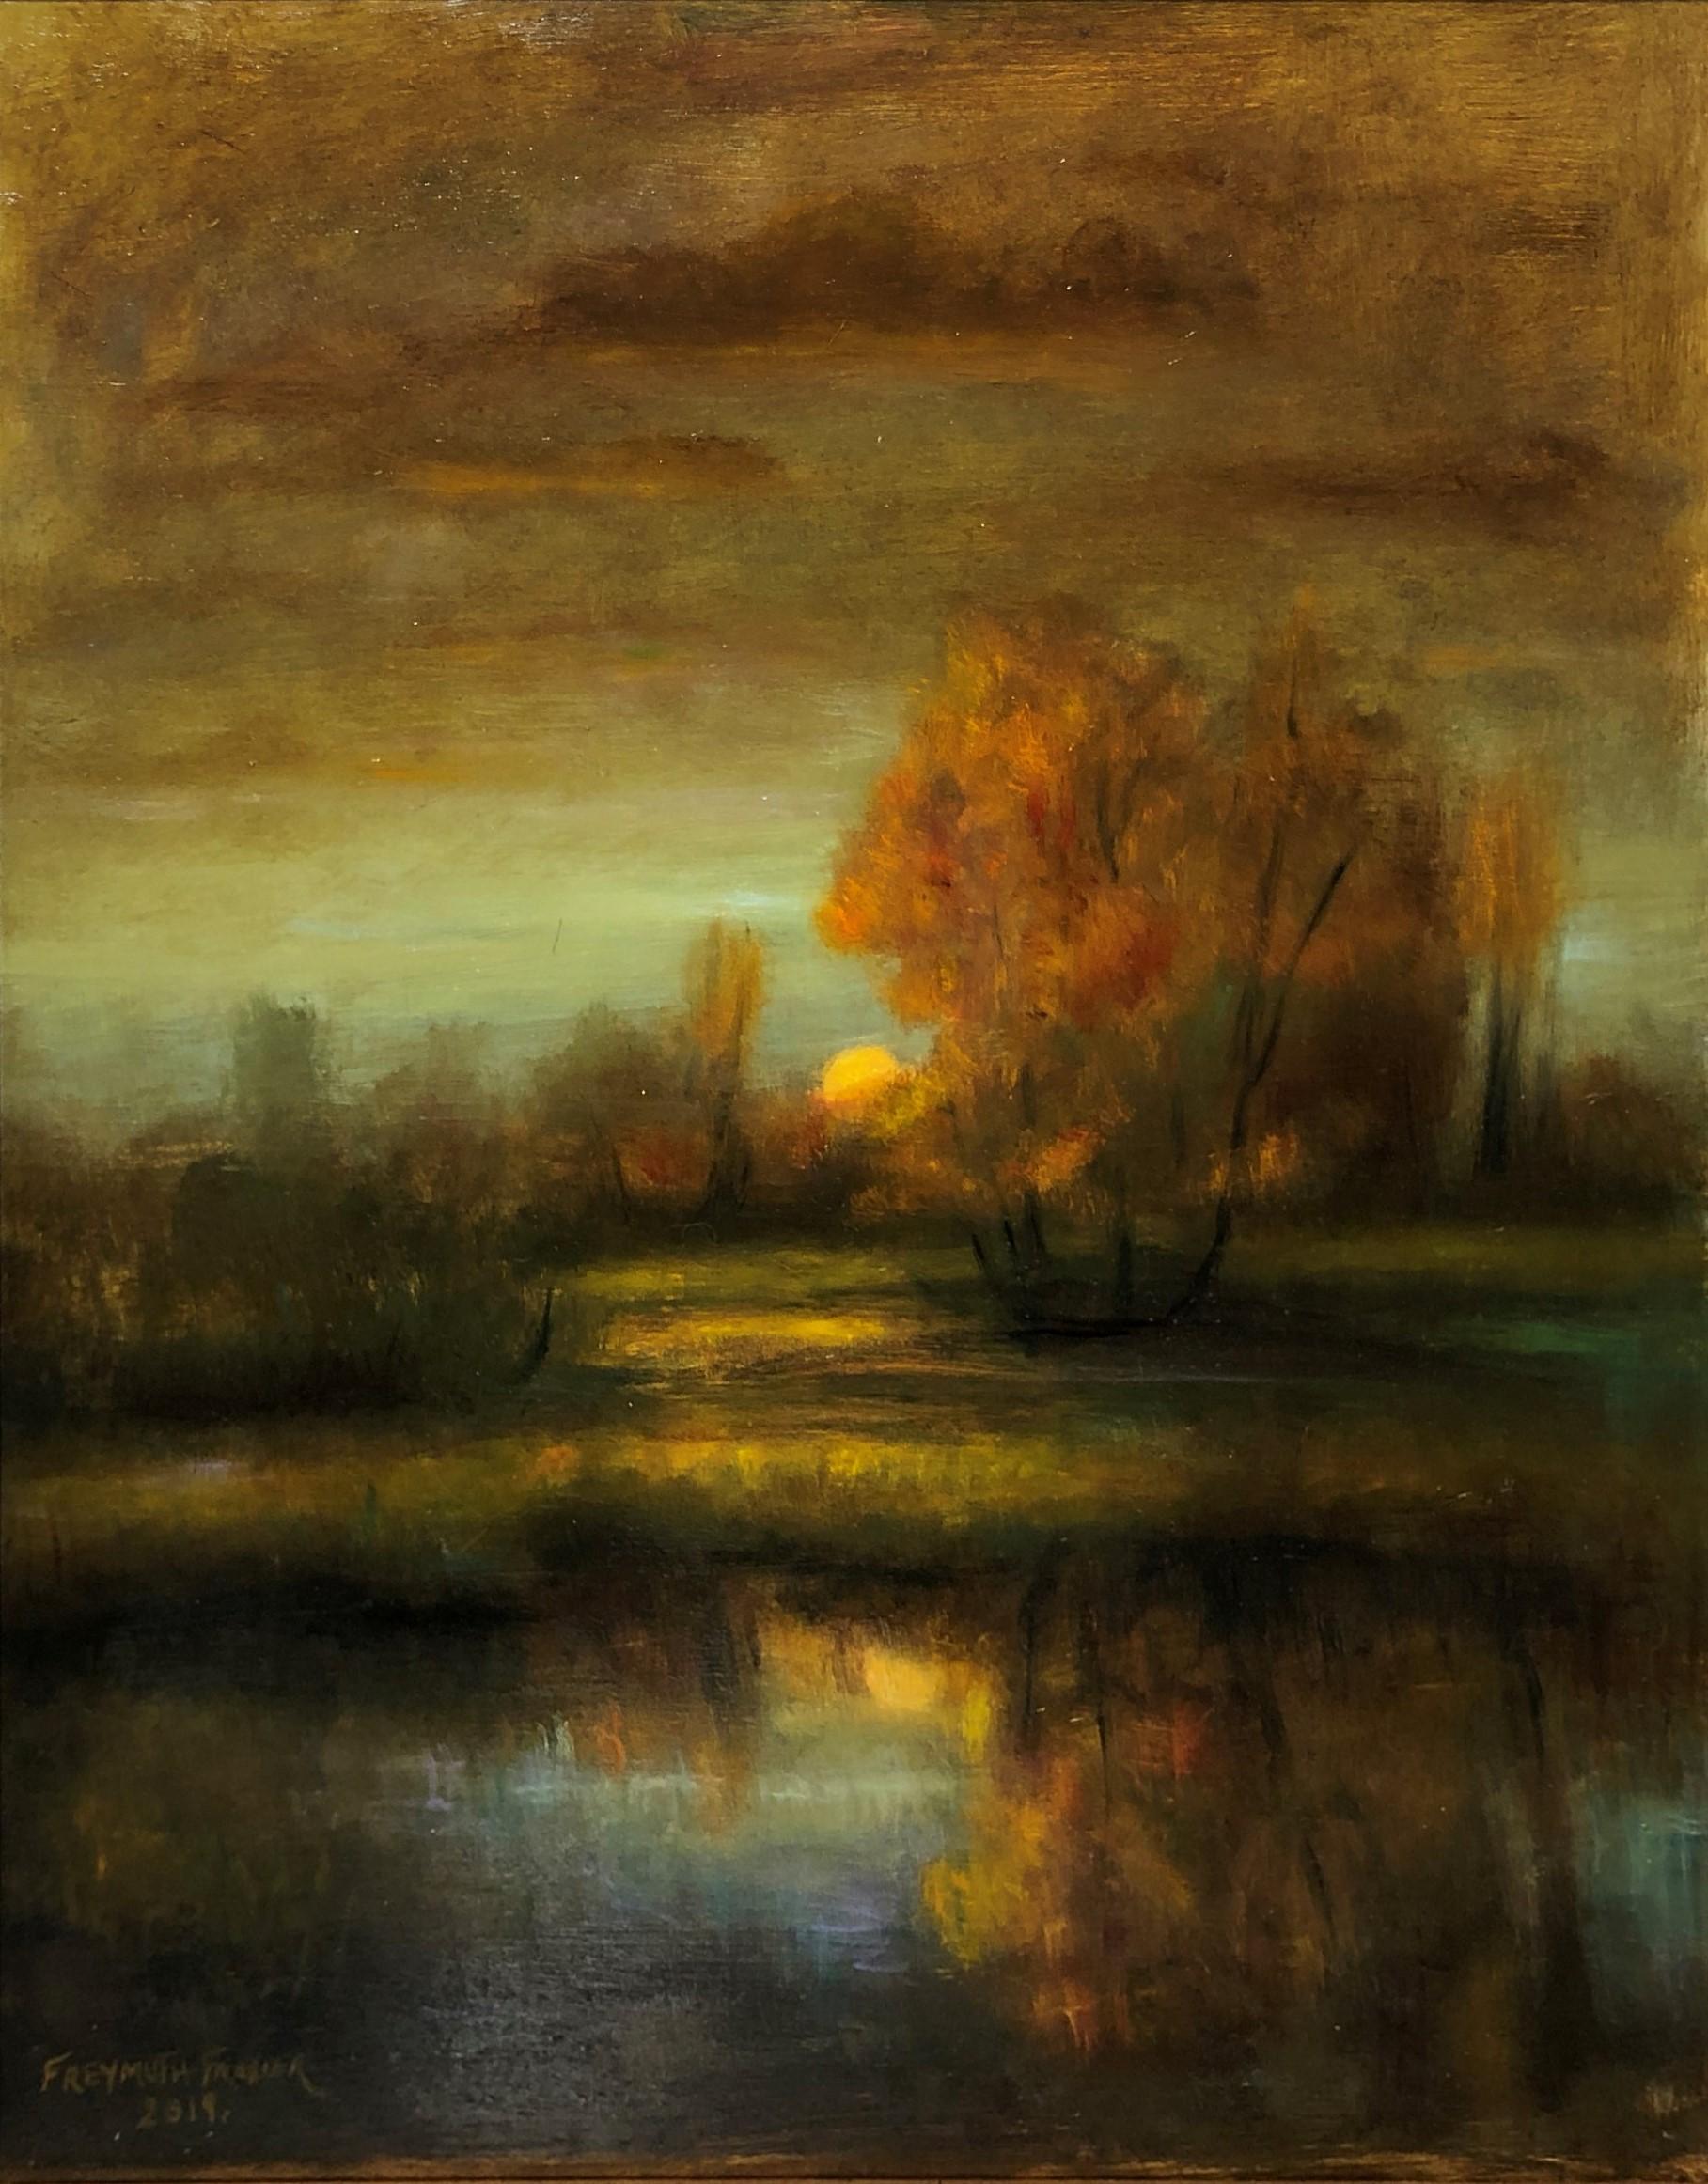 Rich earth tones merge to create this sumptuous landscape by Rose Freymuth Frazier. The setting sun casts dreamy reflections on the pond. The scene is enveloped in soft colors of gold, green and blue to create this romantic landscape. Loose brush